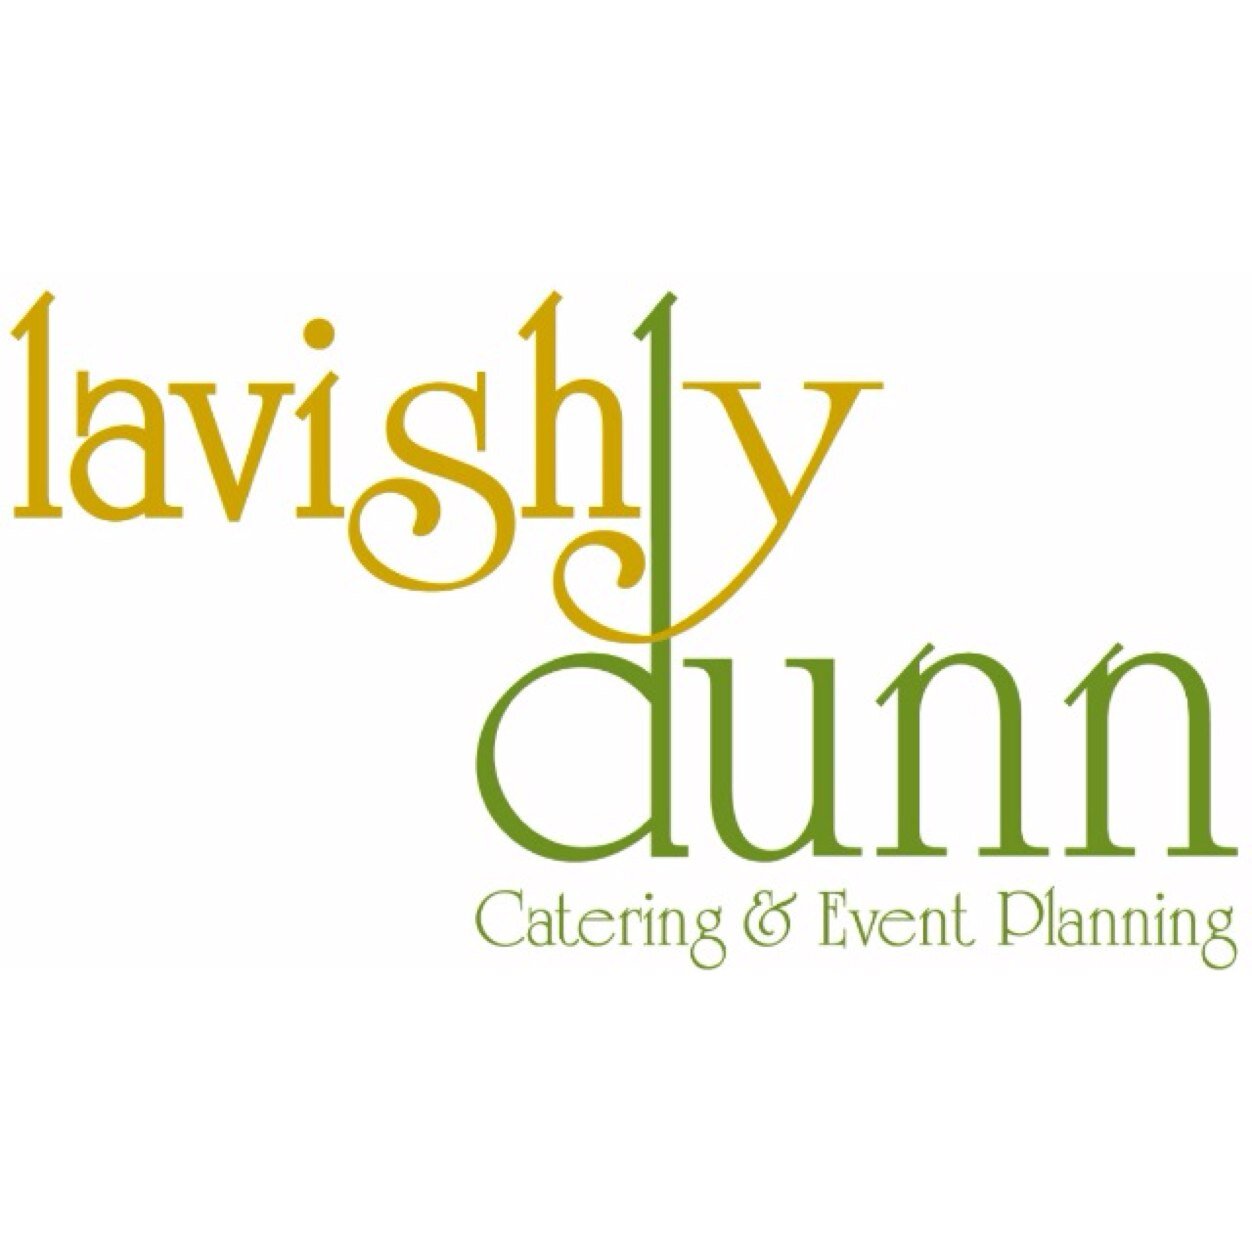 Boston, South Shore, and New England Catering and Event Planning Company EMAIL: info@lavishlydunn.com
PHONE: 617.921.8993